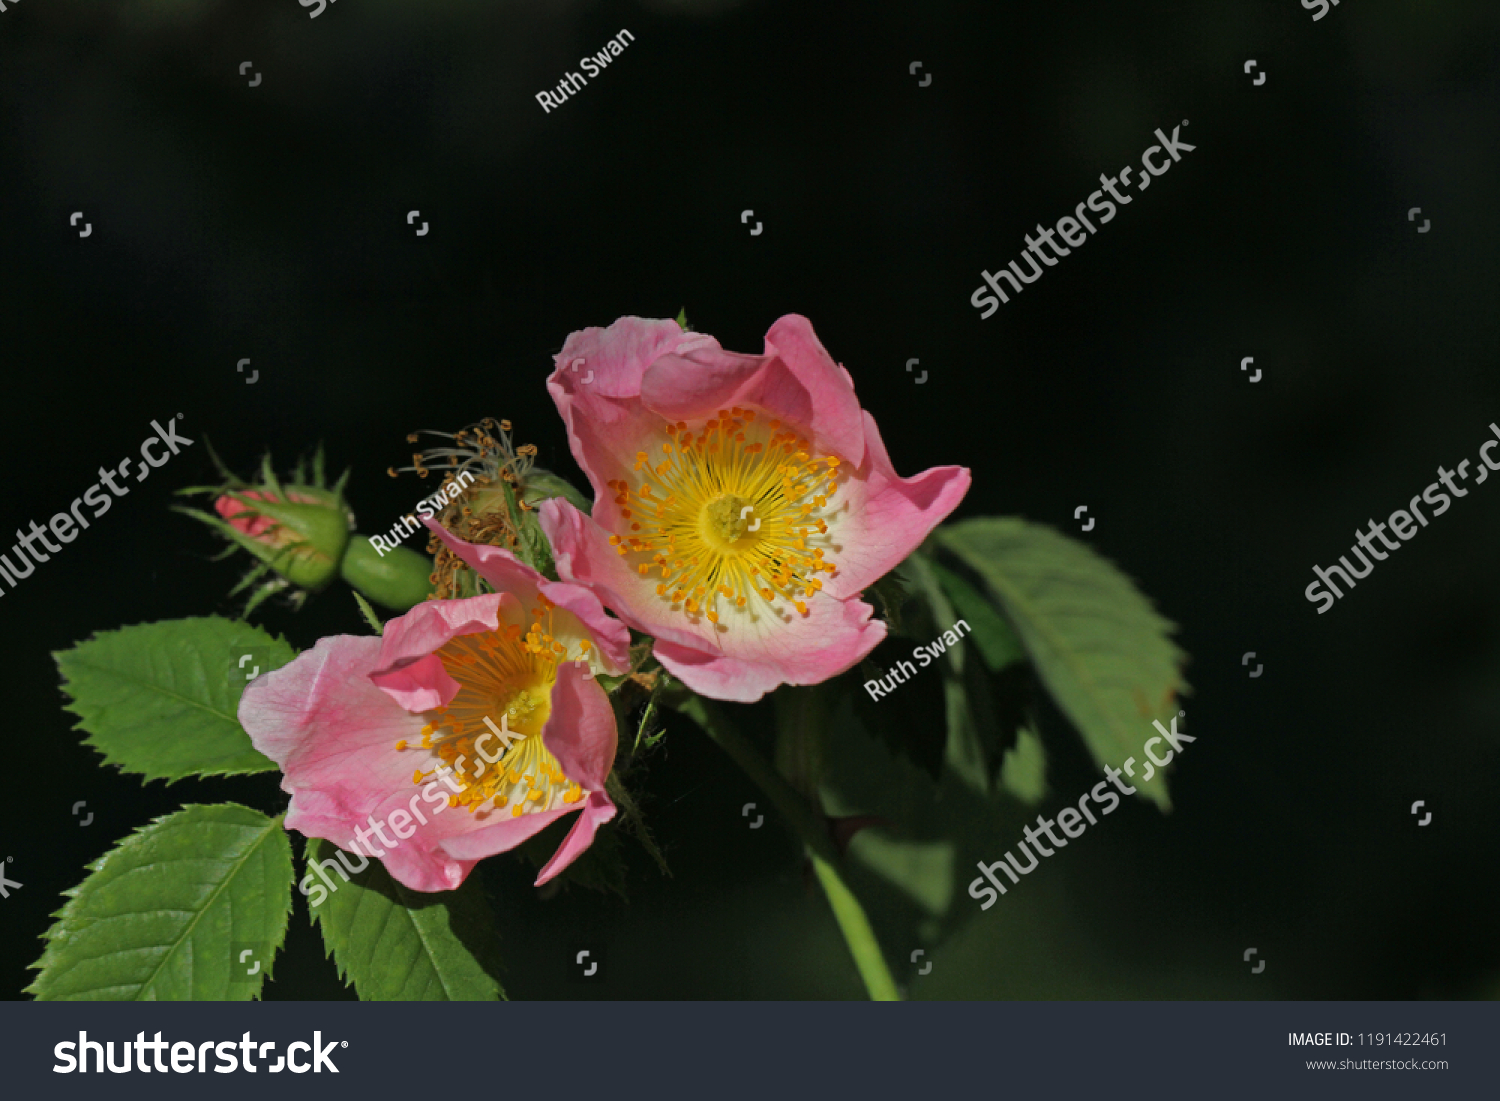 Dog rose or wild rose in bloom in springtime in Italy Latin rosa canina and similar to a sweet briar also called eglantine state flower or state symbol of Iowa and North Dakota #1191422461